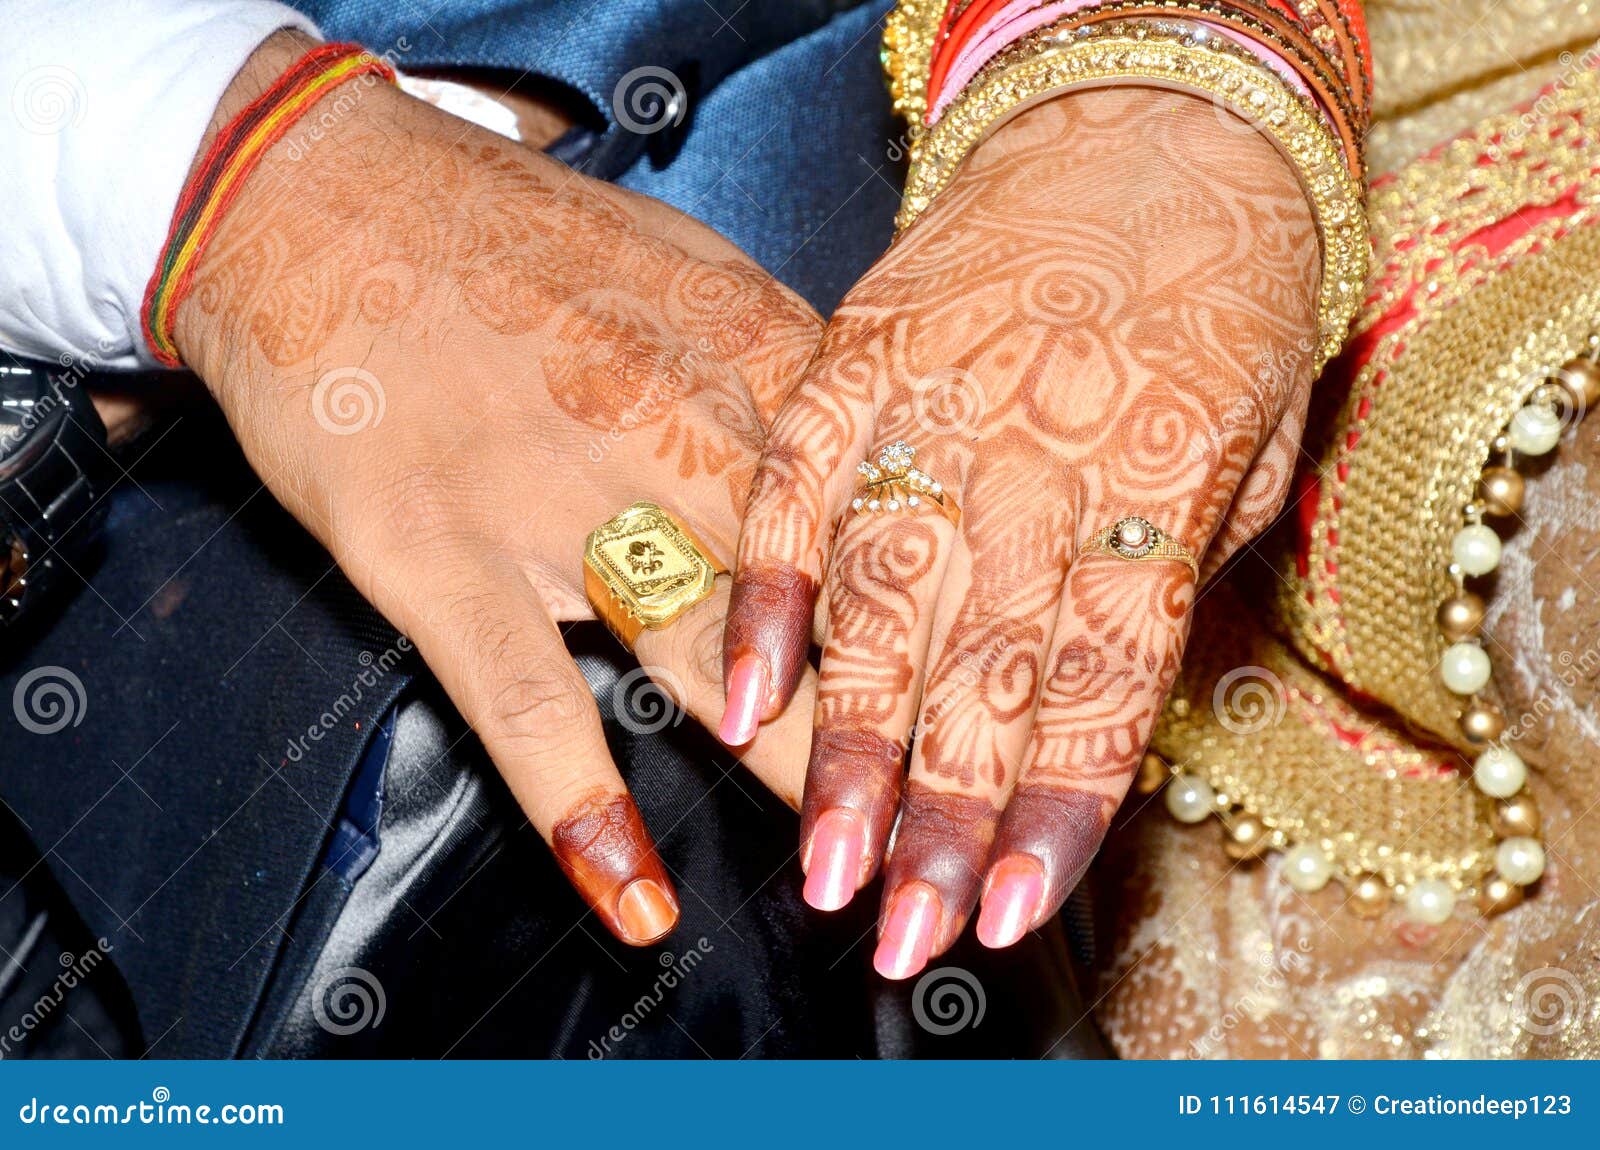 Indian Couples Shows Engagement Rings Stock Image - Image of bride, hindu:  111614211